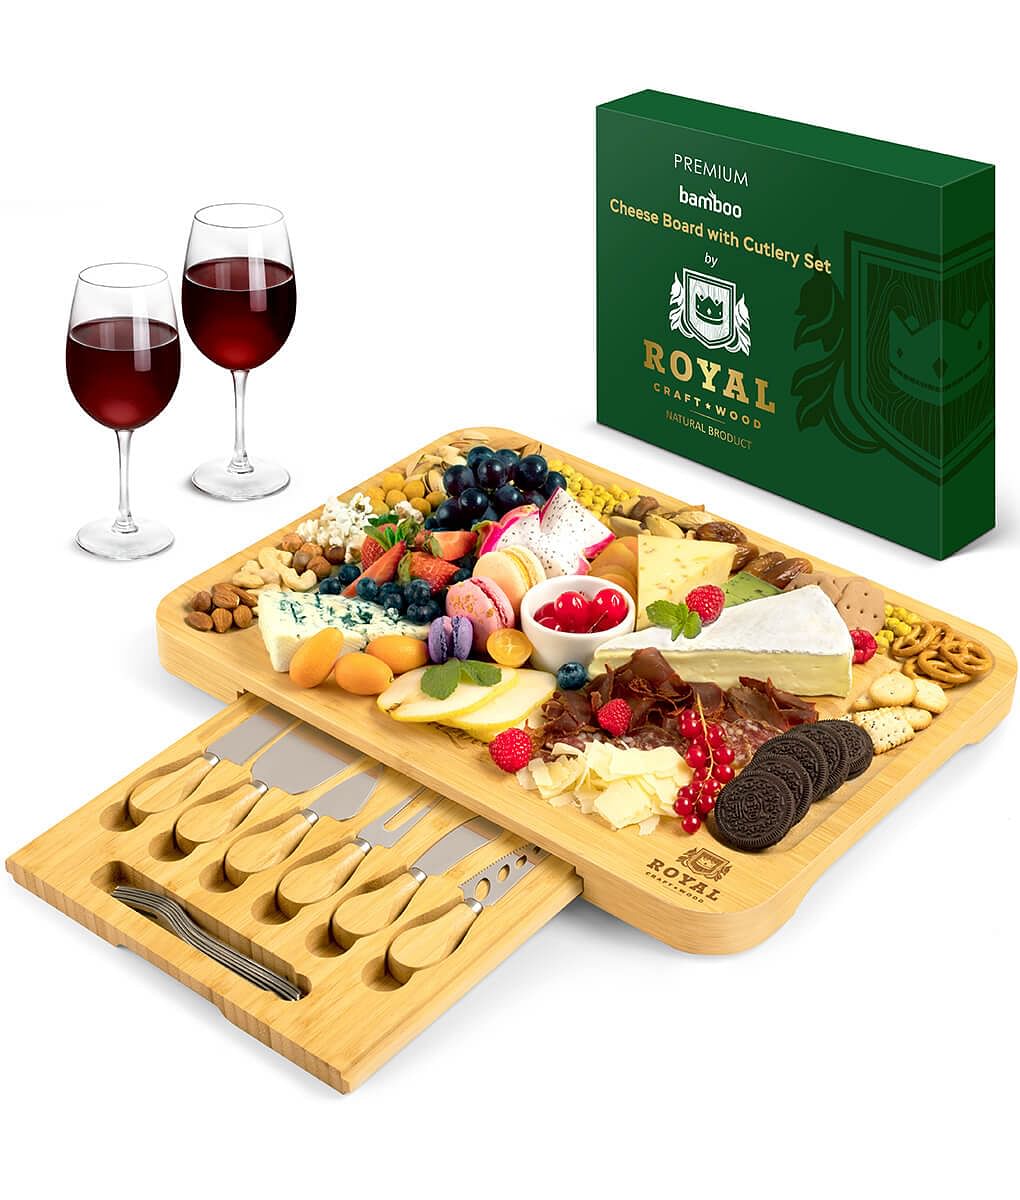 Cheese and Cracker Tray with Slate Plate by Royal Craft Wood